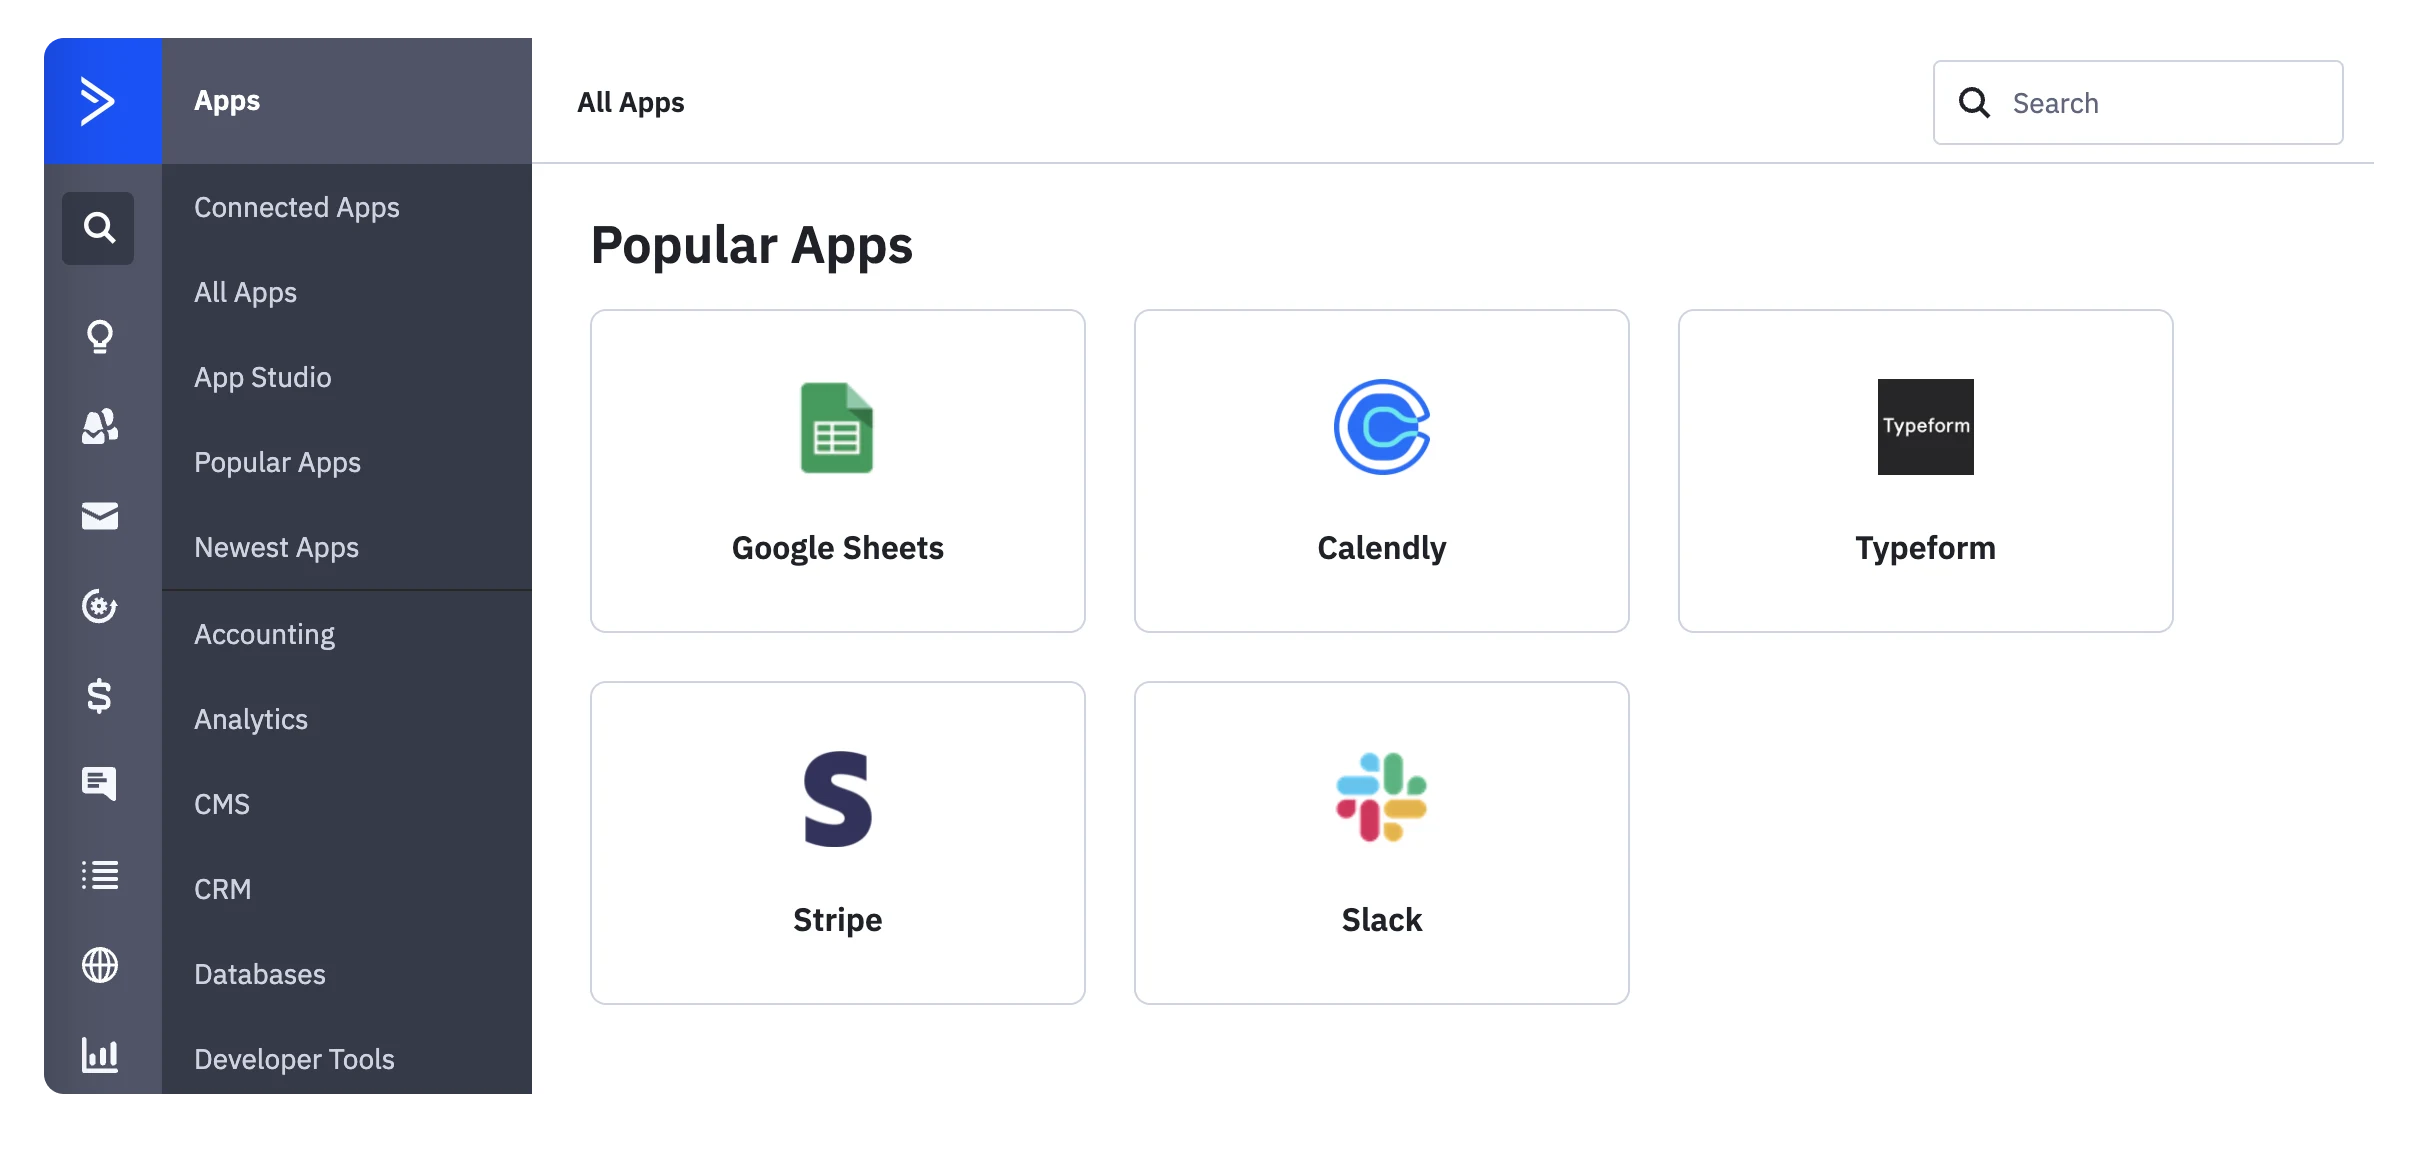 Popular apps available within ActiveCampaign: Google Sheets, Calendly, Typeform, Stripe, Slack